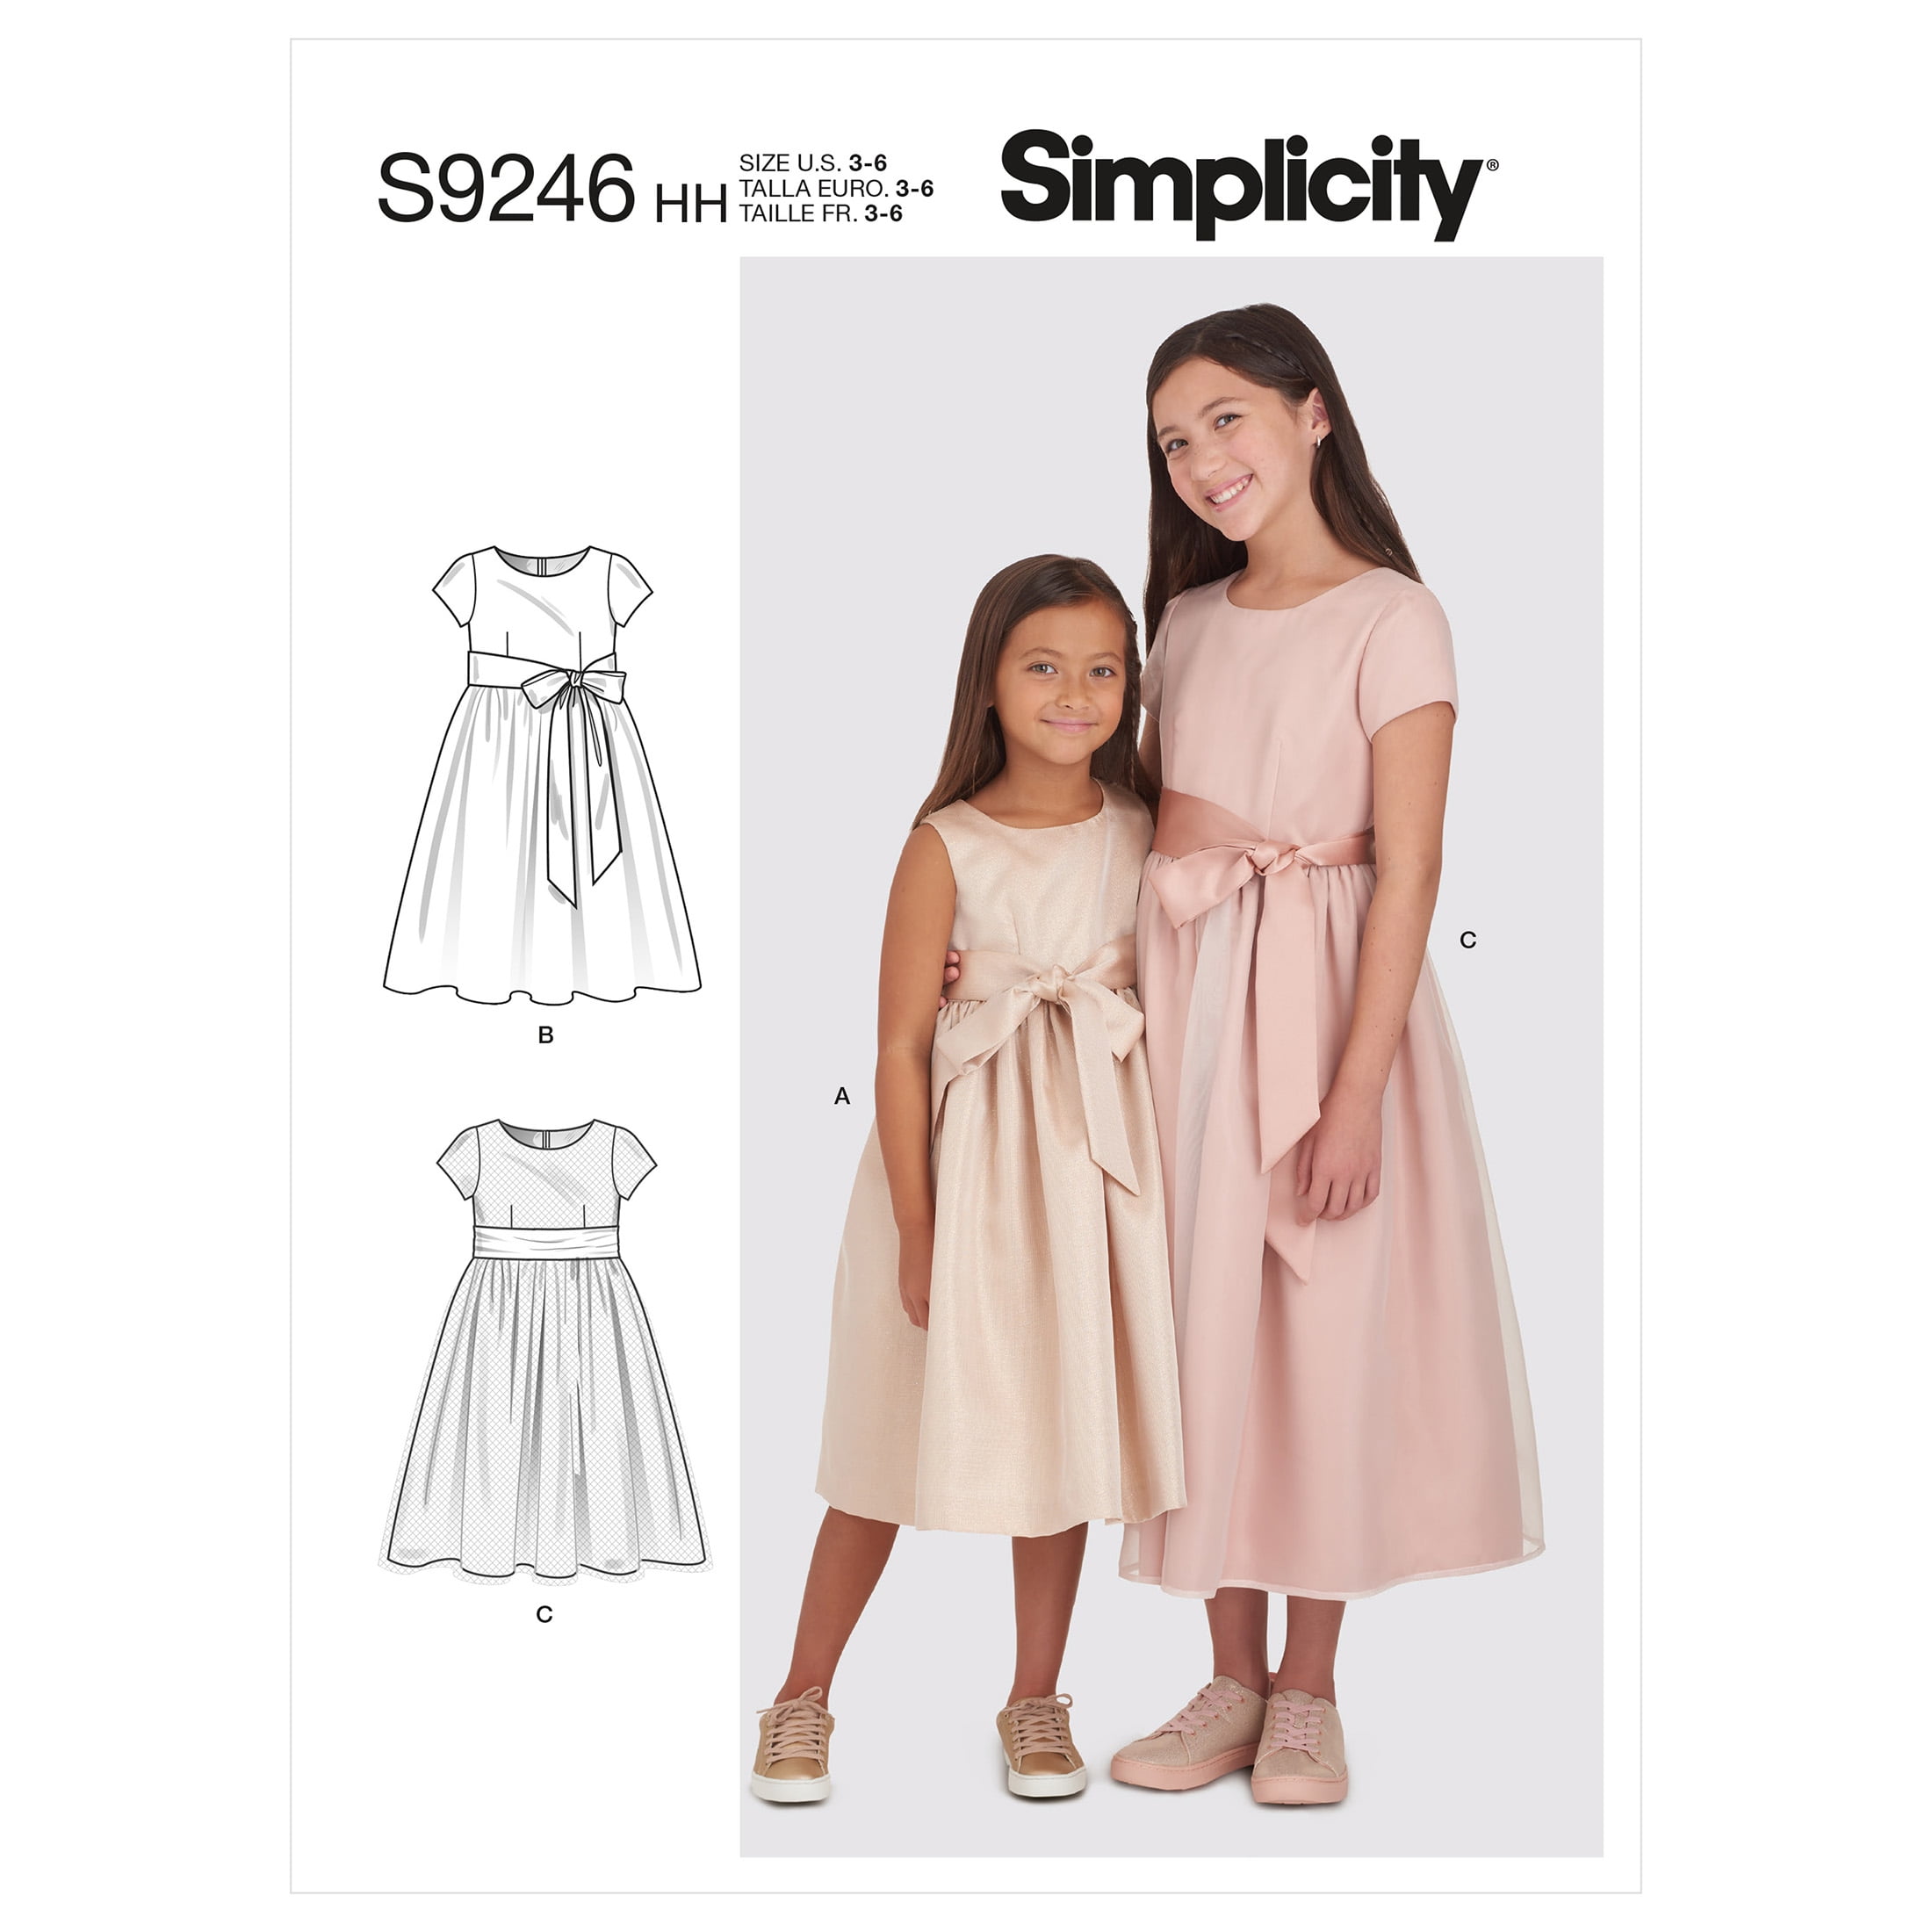  Simplicity Sewing Pattern 2329 Child's and Girls' Costumes, K5  (7-8-10-12-14) : Arts, Crafts & Sewing